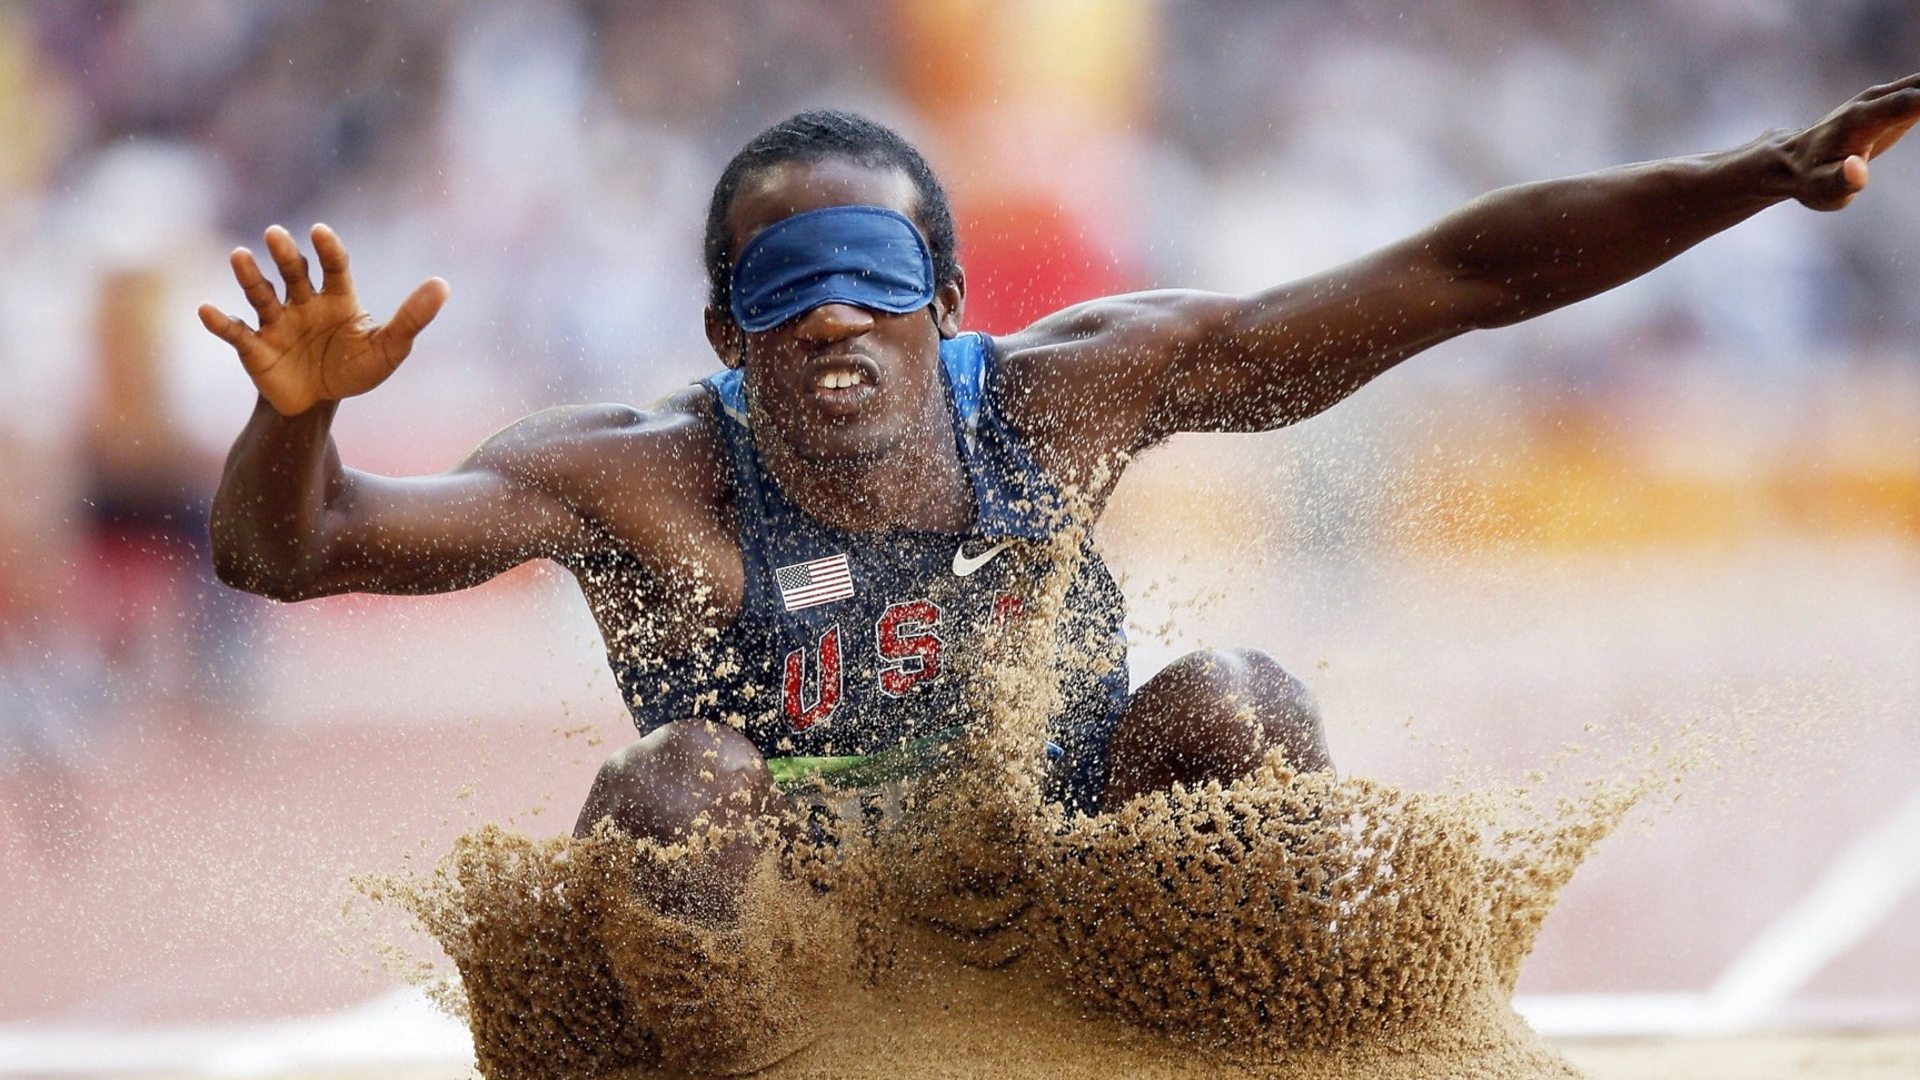 Long Jump: Lex Gillette, Record-breaking blind long jumper, A competition that involves leaping as far as possible. 1920x1080 Full HD Wallpaper.